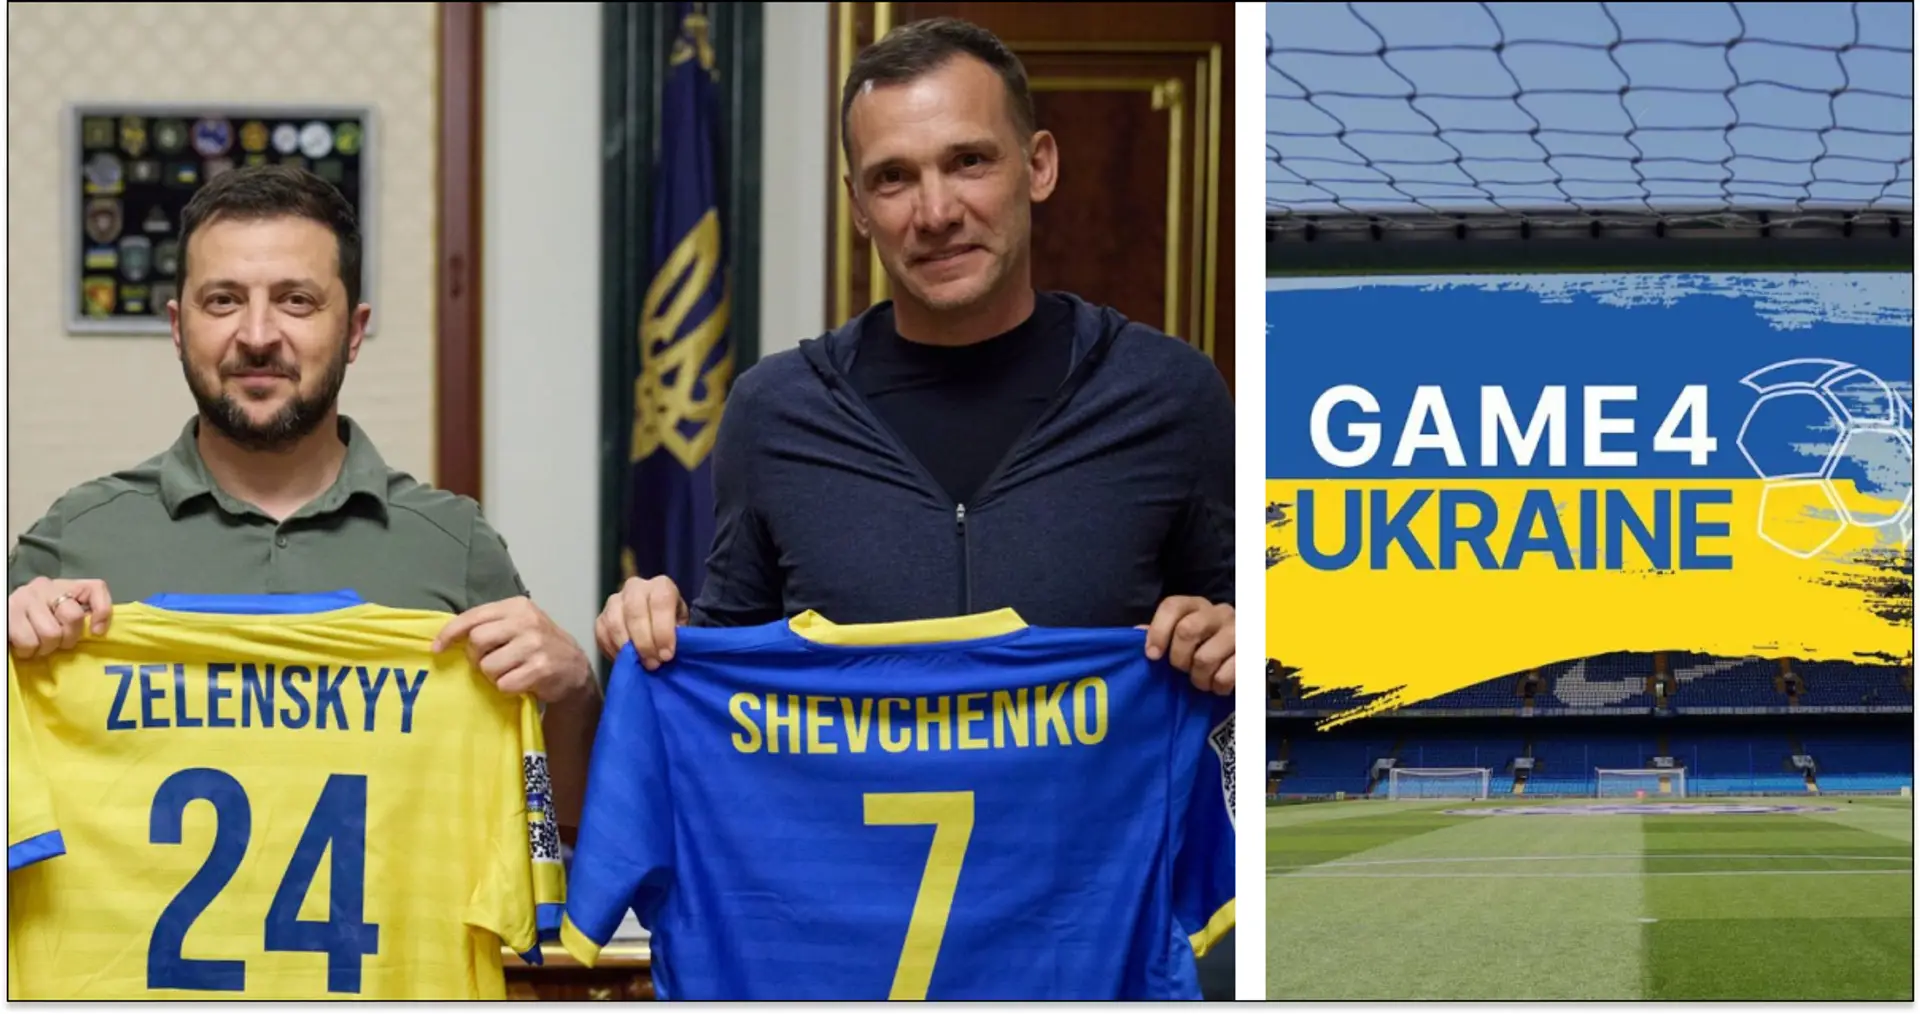 Charity4Ukraine match to be held at Stamford Bridge, Shevchenko and 'several Chelsea legends' to feature